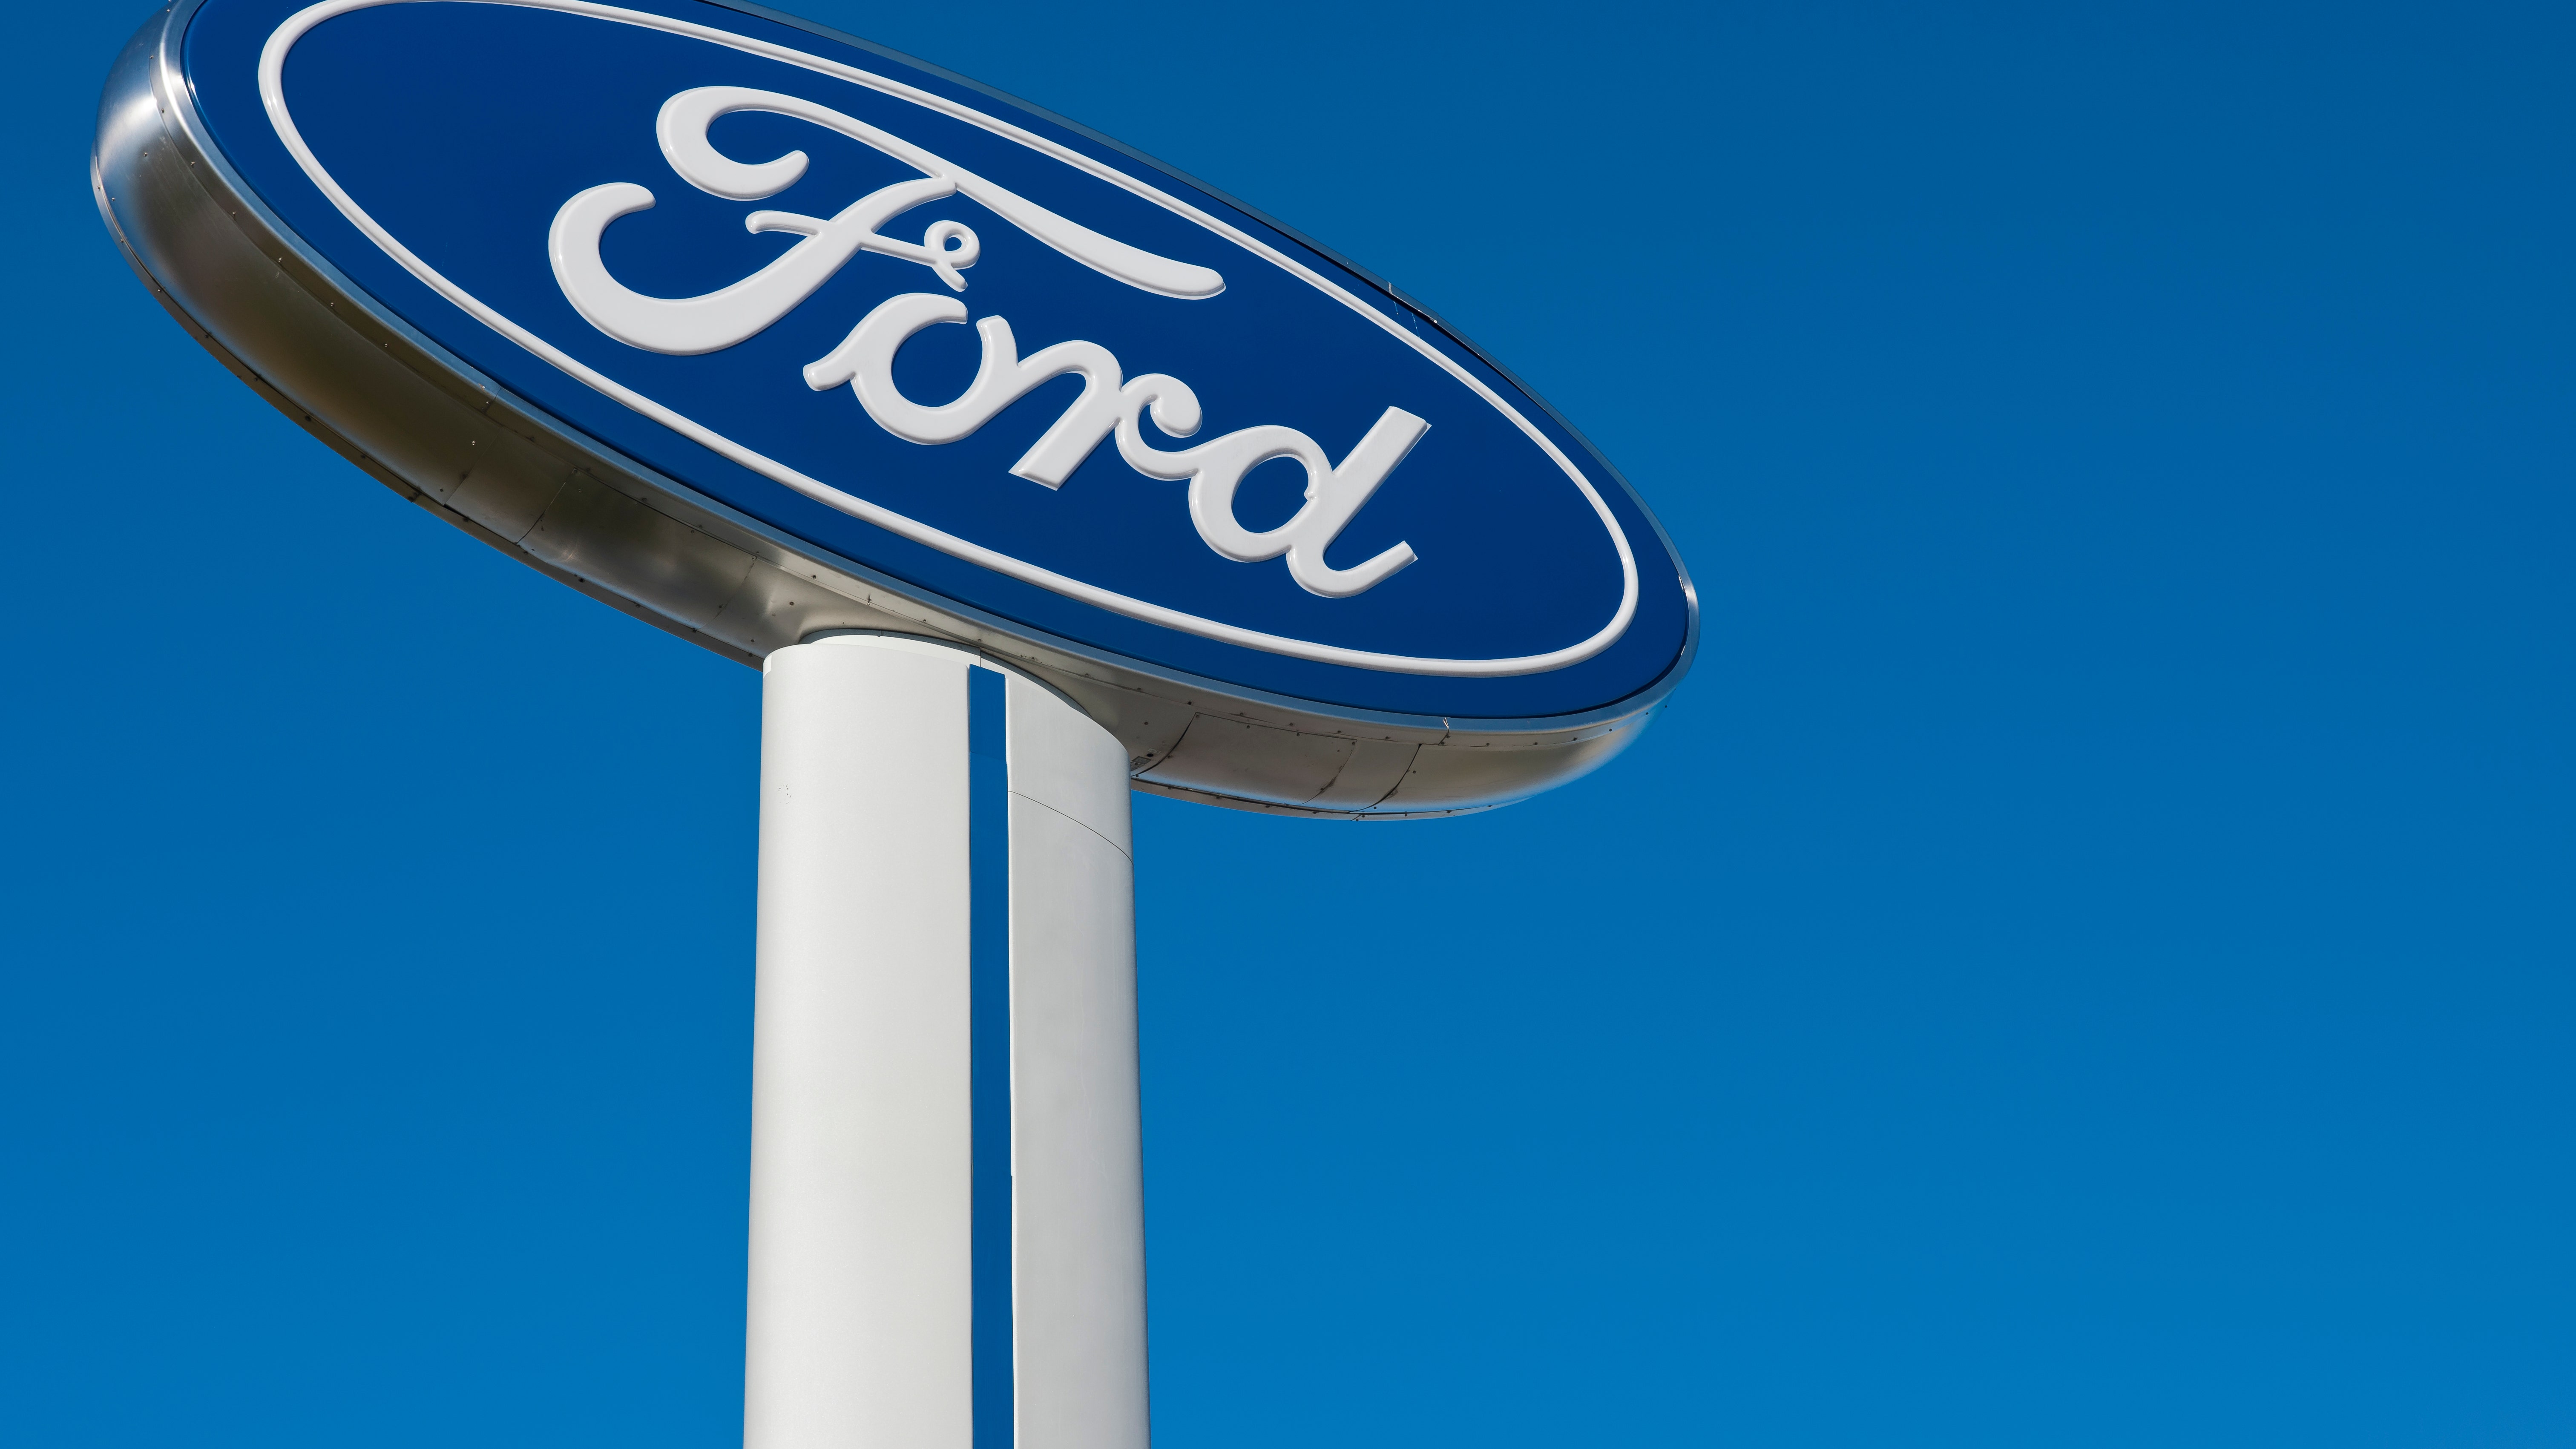 why is ford stock so low right now